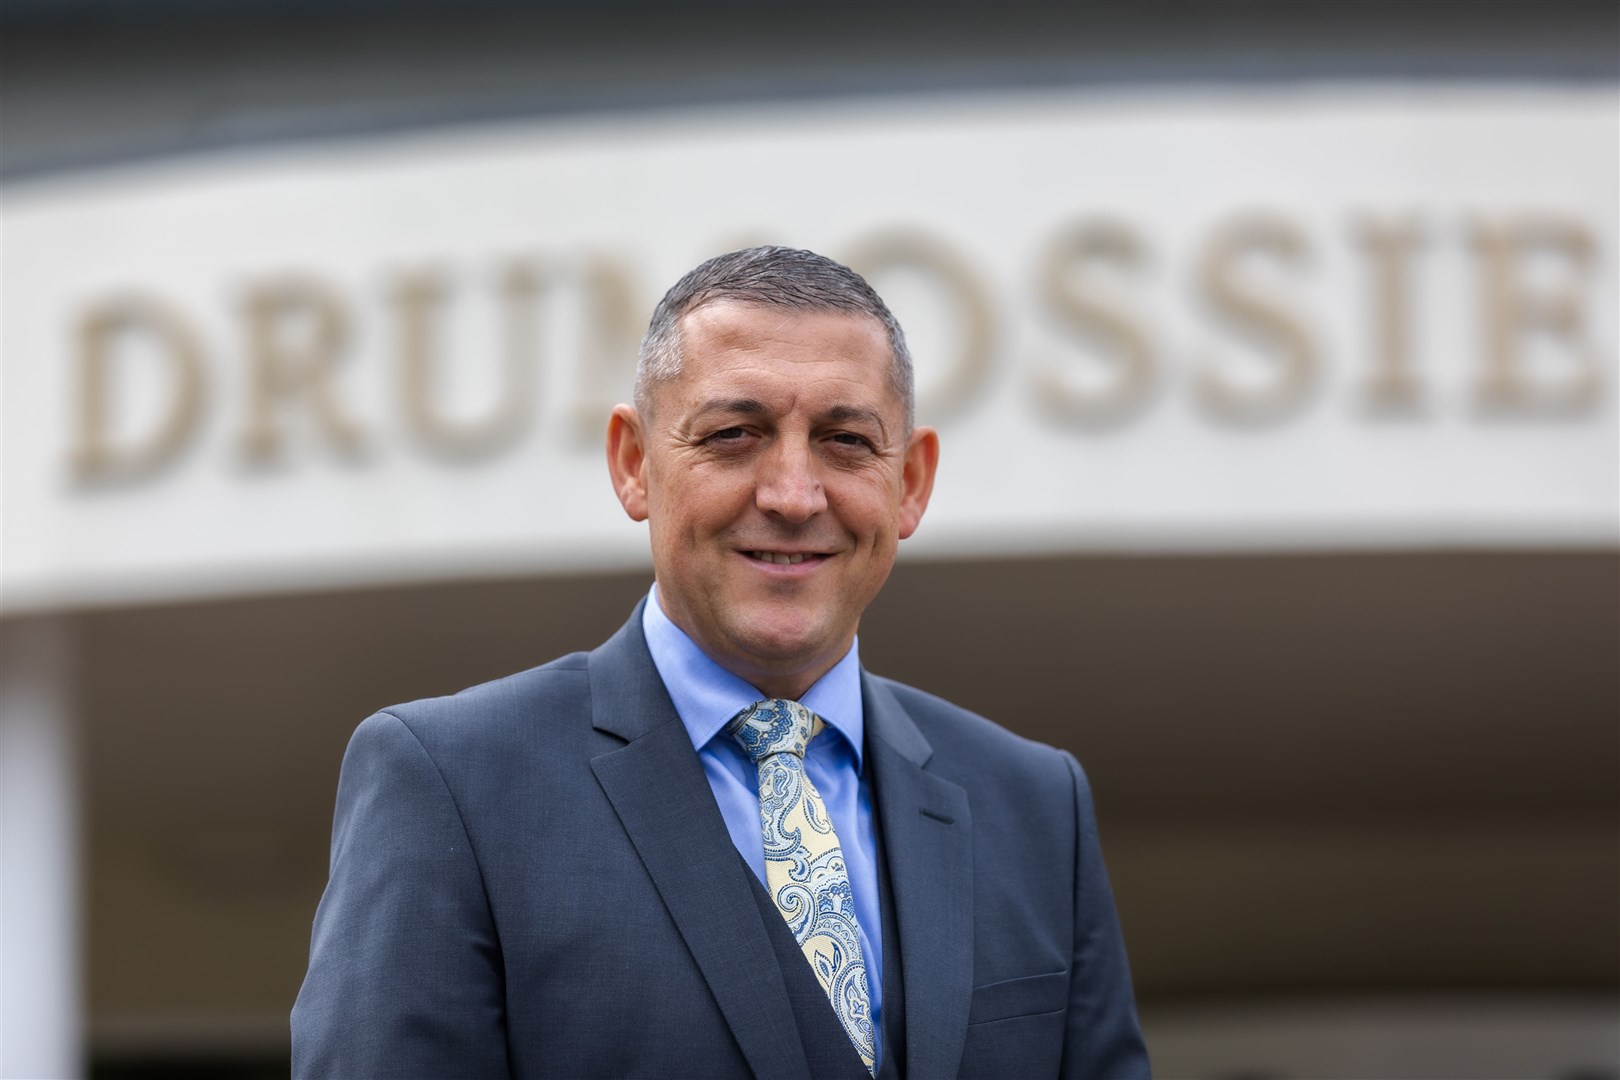 General manager of the Macdonald Drumossie Hotel, Inverness, Kenny Mcmillan, is looking forward to welcoming shortlistees and sponsors for the awards gala dinner and ceremony.